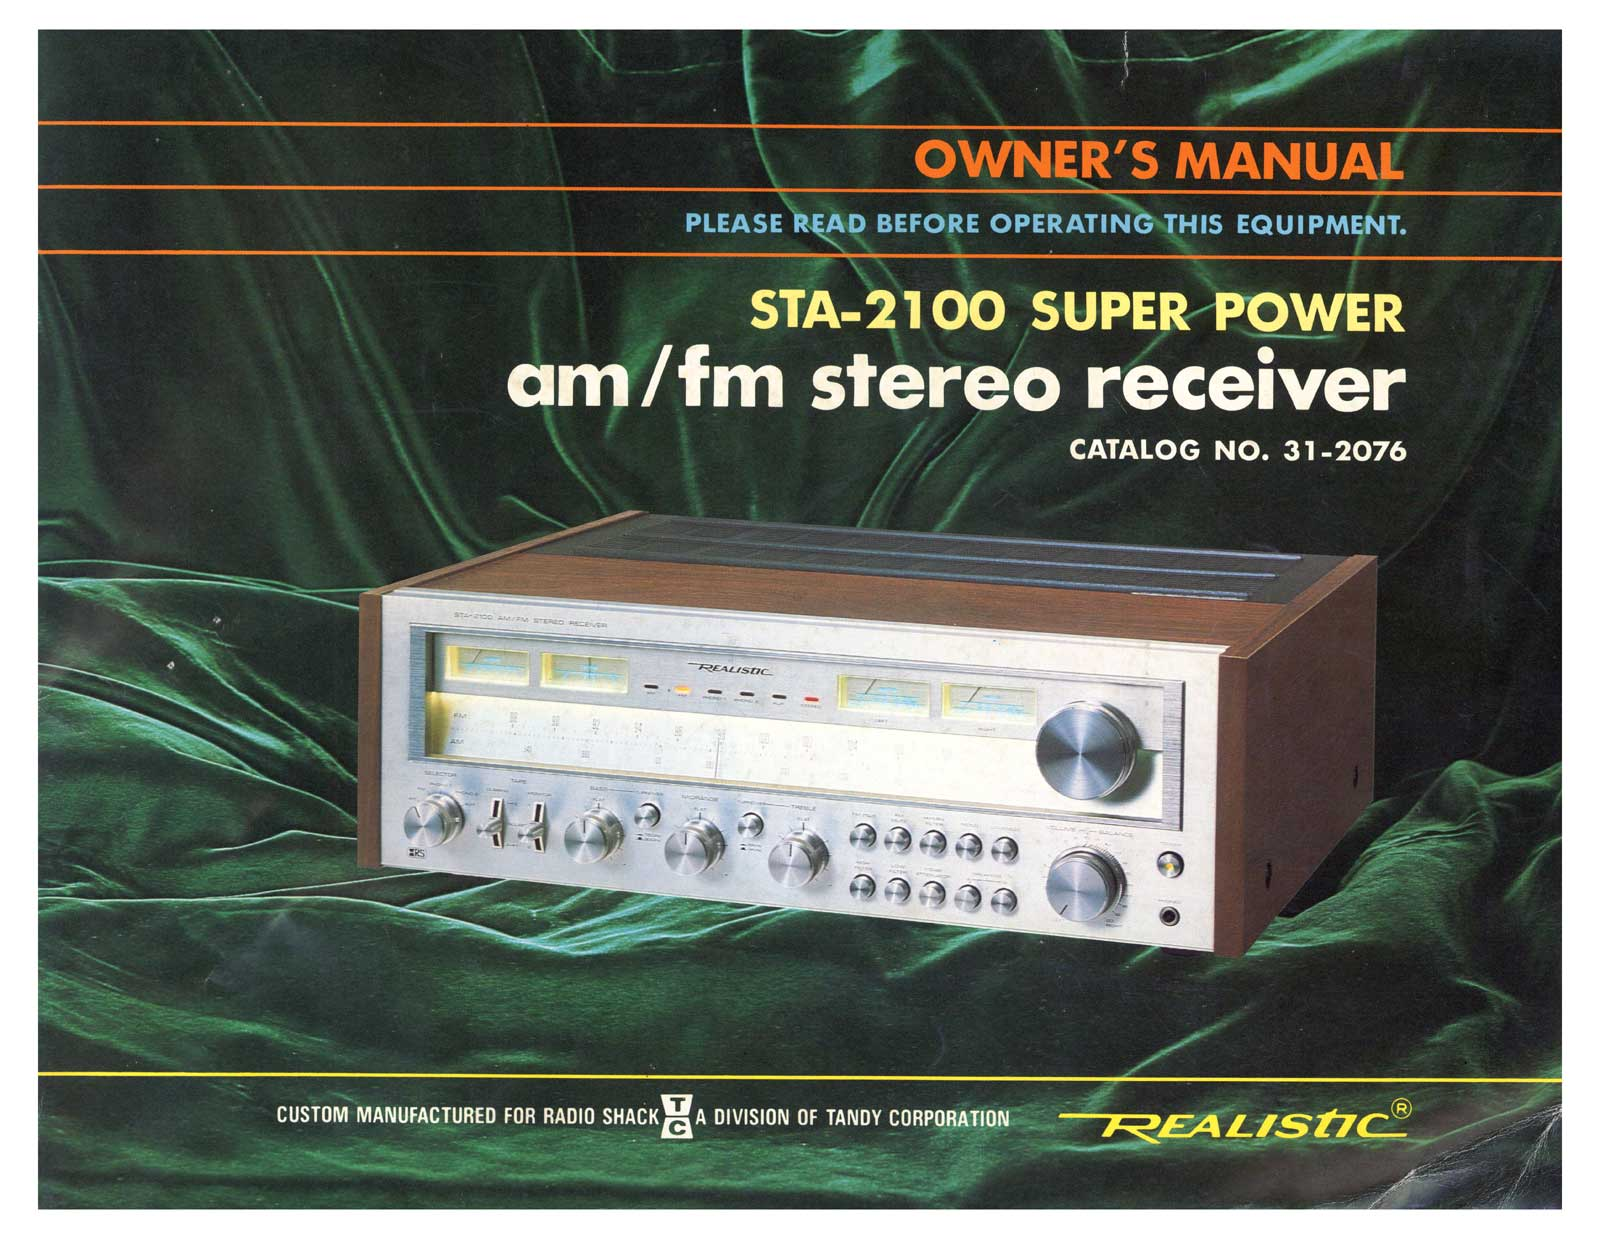 Realistic STA-2100 Owners manual